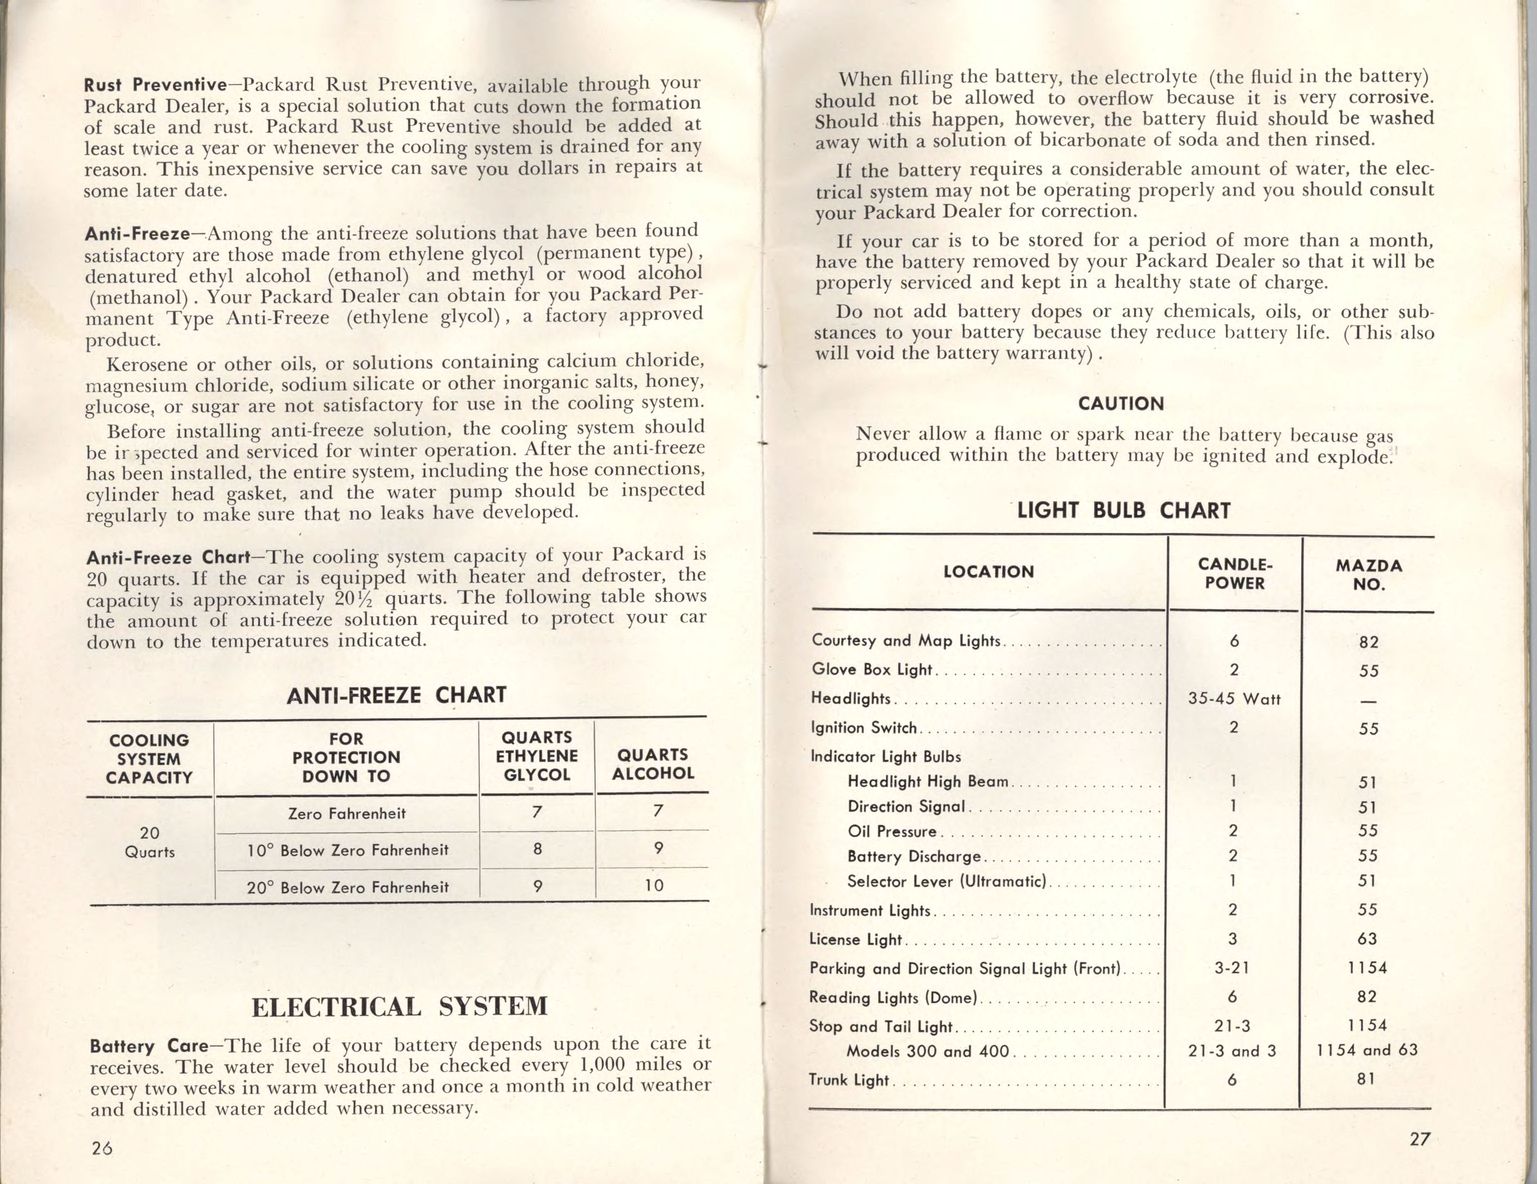 1951 Packard Owners Manual Page 6